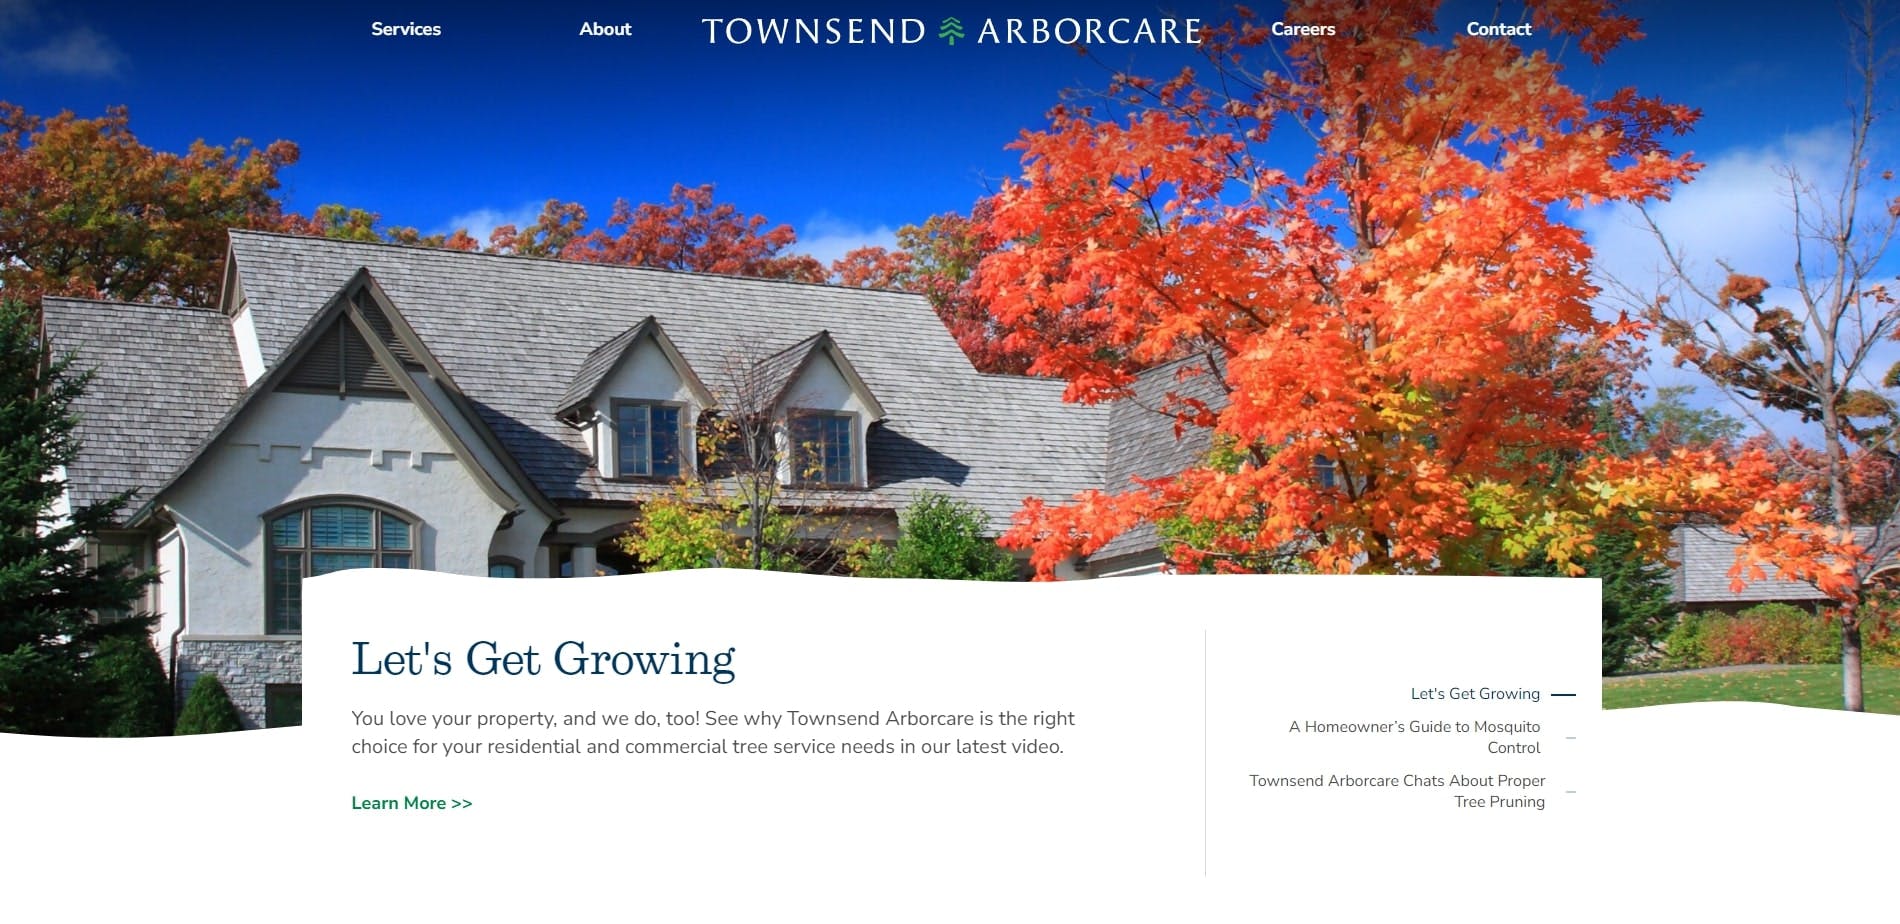 A screenshot of The Townsend Arborcare Homepage